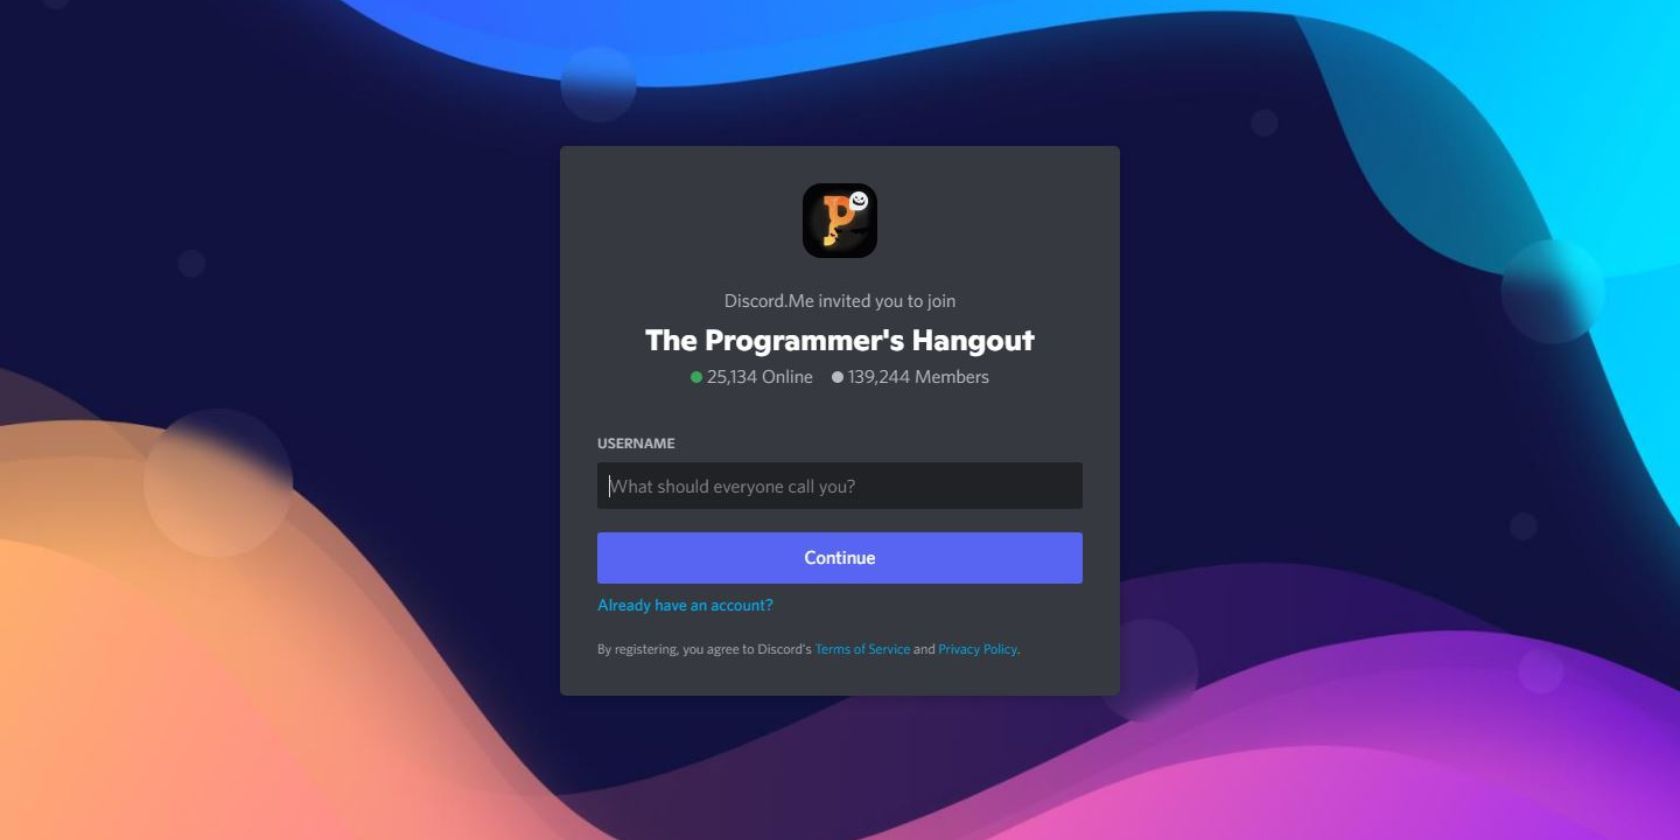 A screenshot of The Programmer's Hangout's invite page